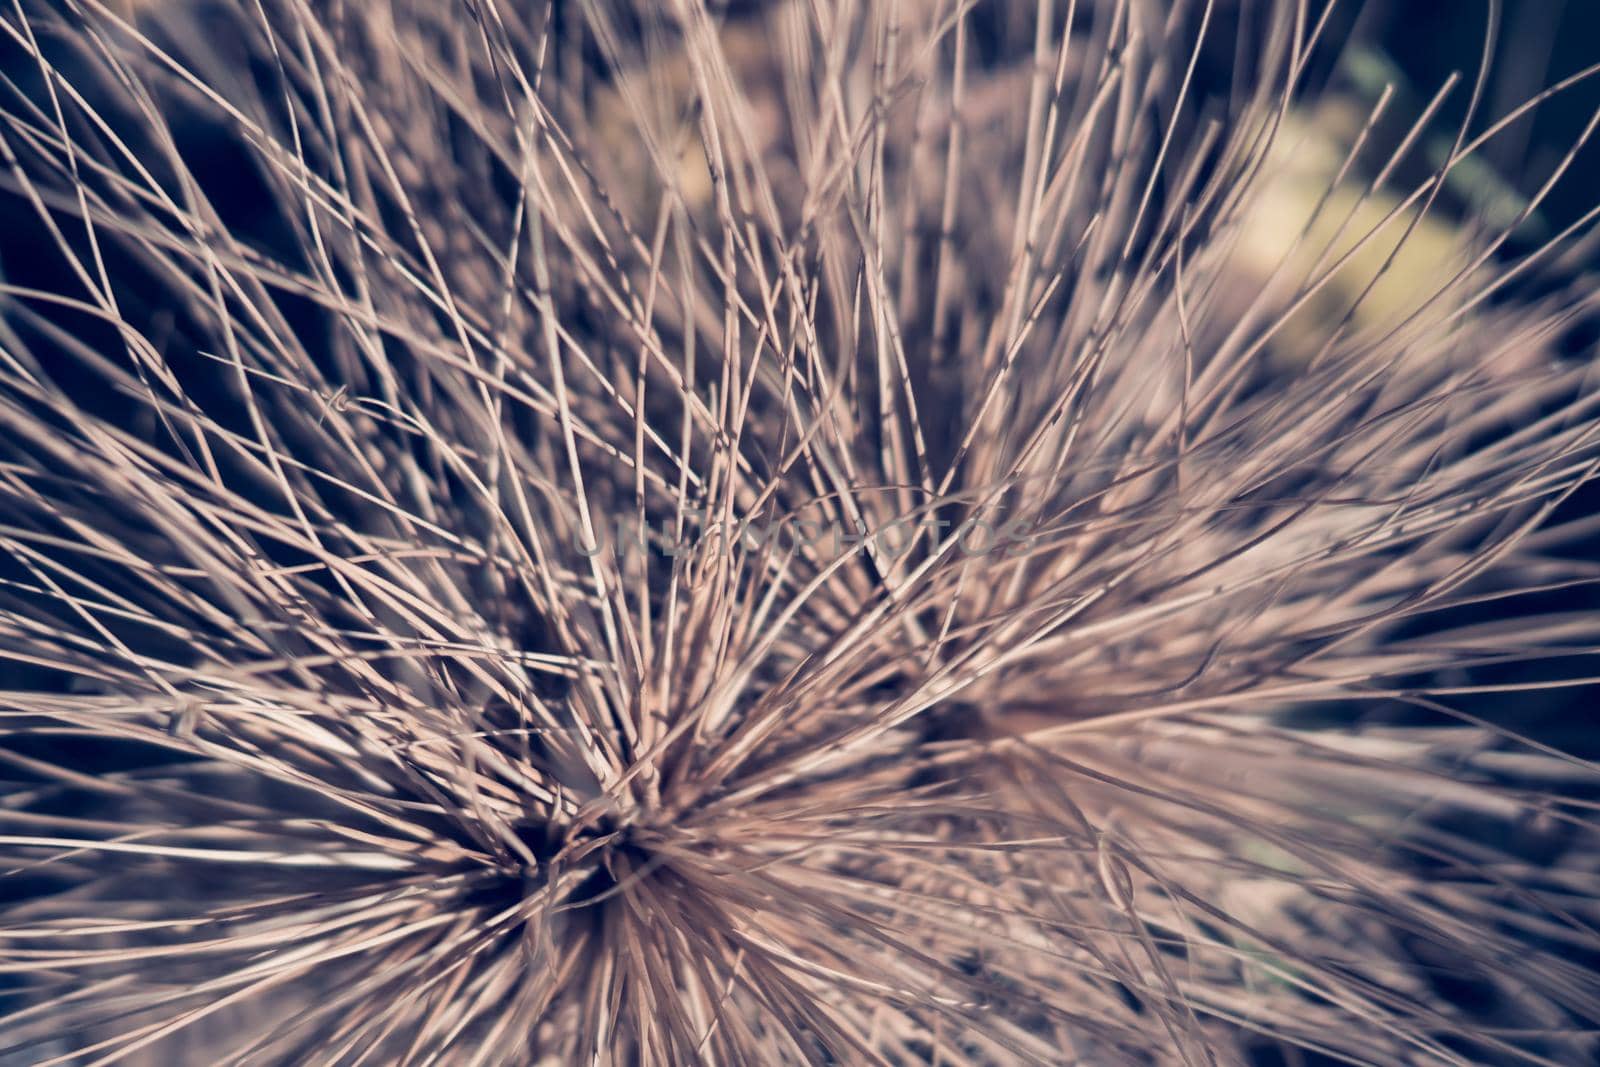 Abstract real photo nature beauty background. Macro dry tropical long needles thorns branch plant grass looks like firework. Decor element ideas. Blue brown sun tone. More color in stock by nandrey85